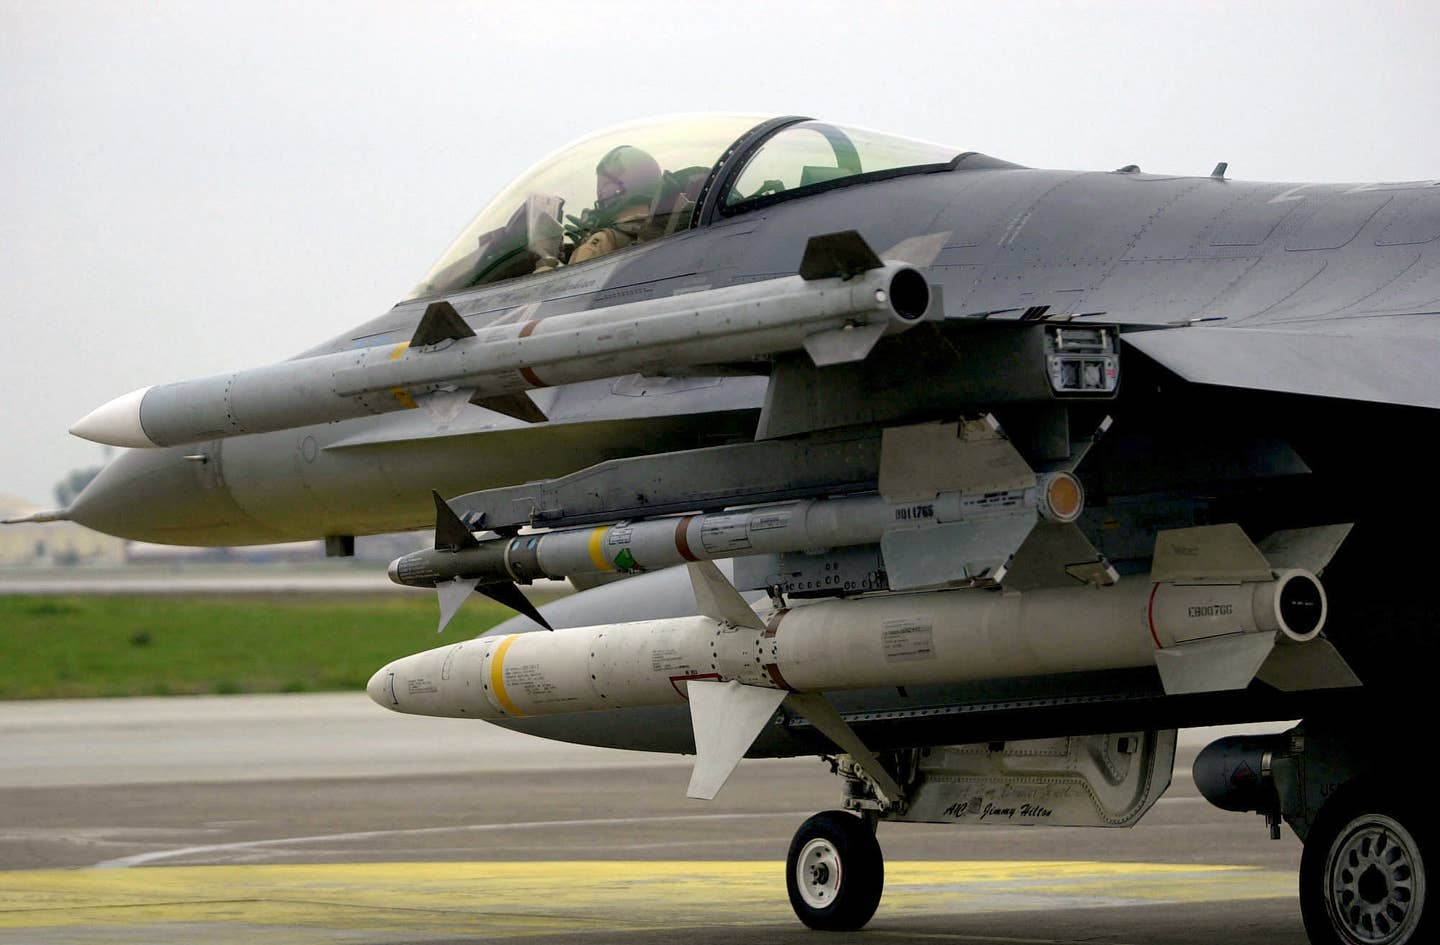 An F-16CJ taxis with an AGM-88 HARM under its wing, as well as an AIM-9M Sidewinder on a pylon with a towed decoy housing, an AIM-120C AMRAAM on the wingtip, and an electronic warfare pod under its belly. (USAF image)